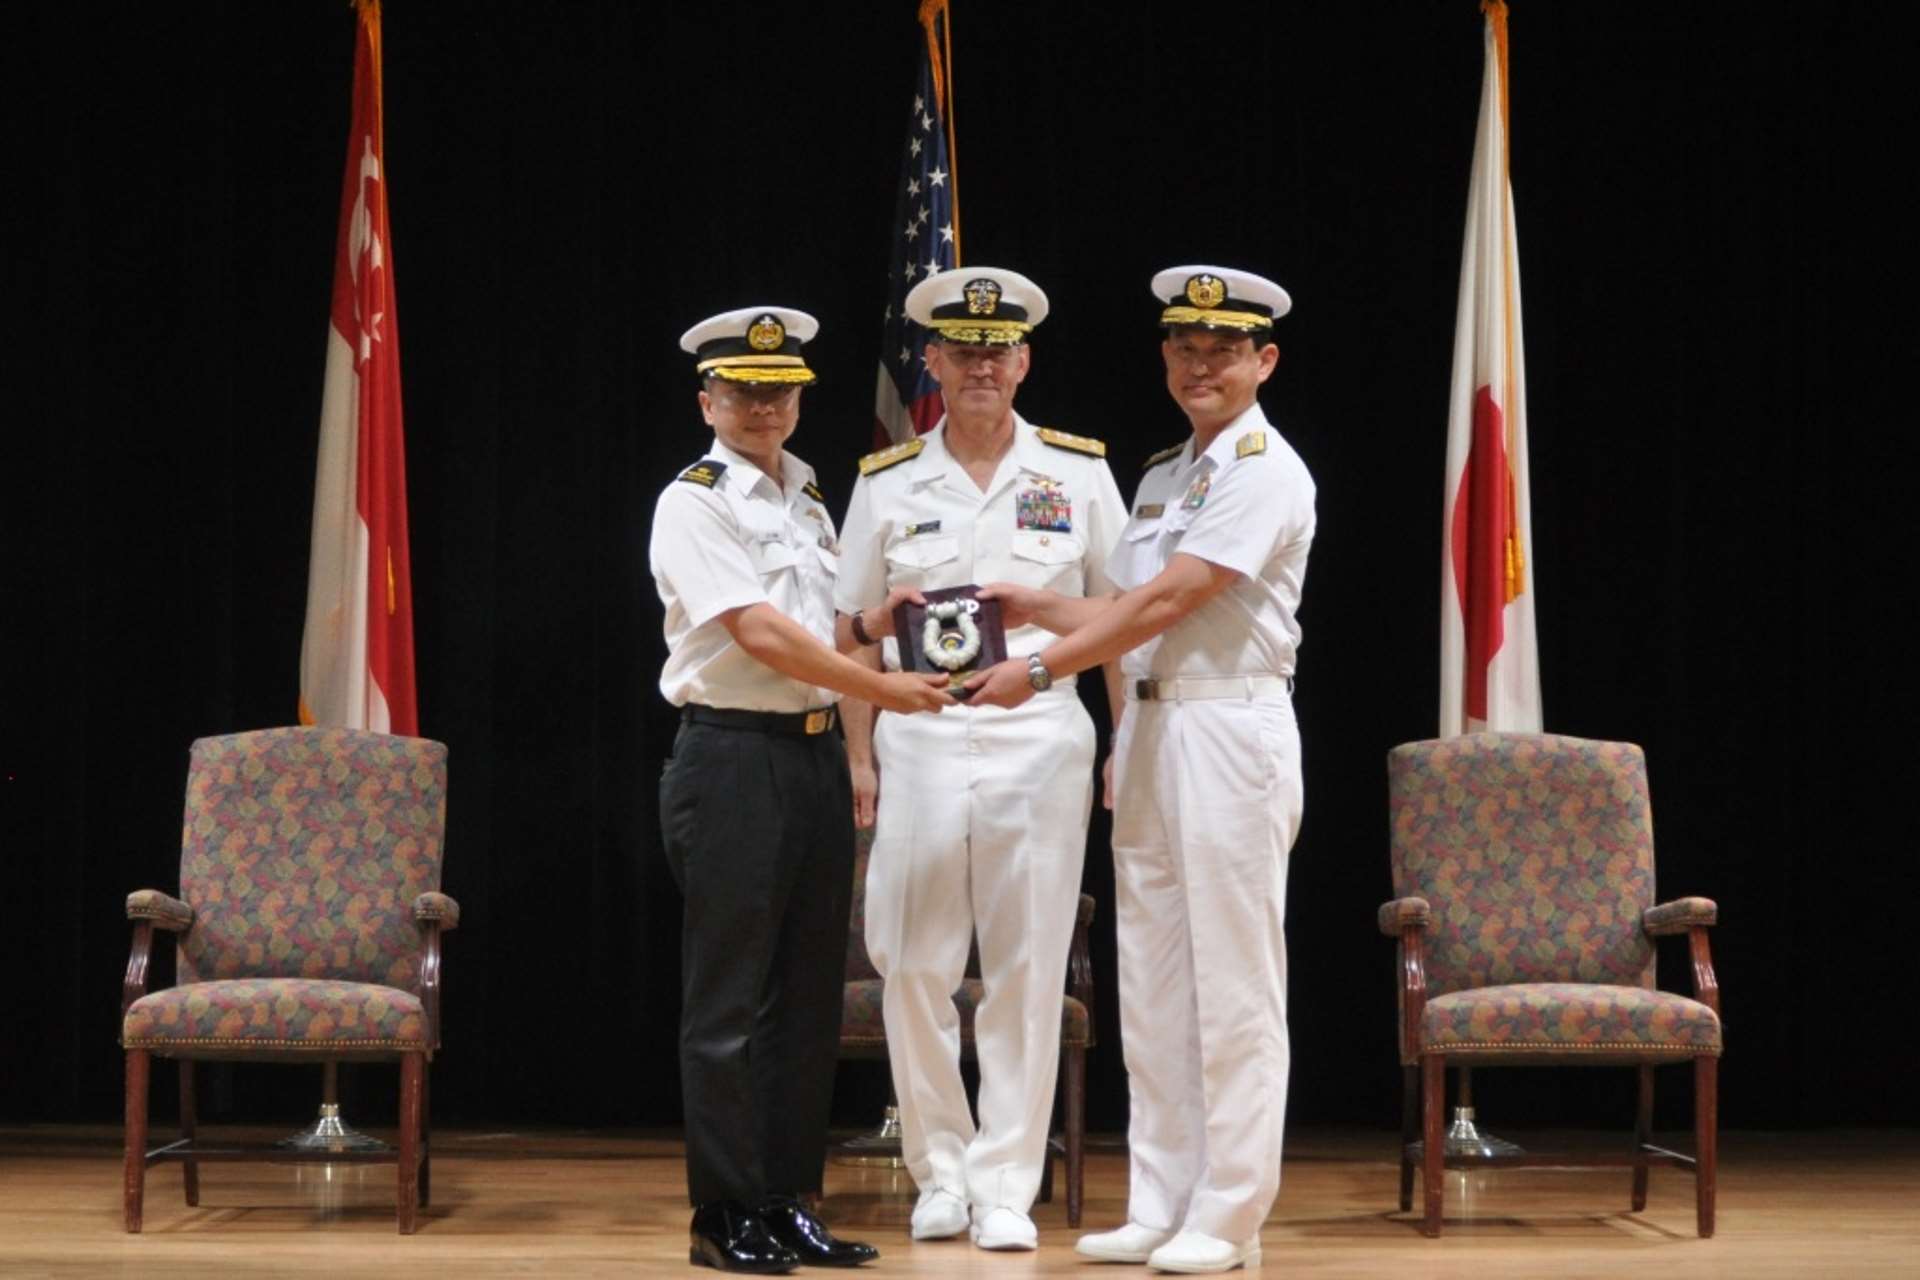 Rear-Admiral (RADM) Saw Shi Tat (left) taking over the command of CTF 151 from outgoing Commander RADM Daisuke Kajimoto (right), at the Change of Command Ceremony in the presence of Commander, Combined Maritime Forces, Vice Admiral Scott A. Stearney.